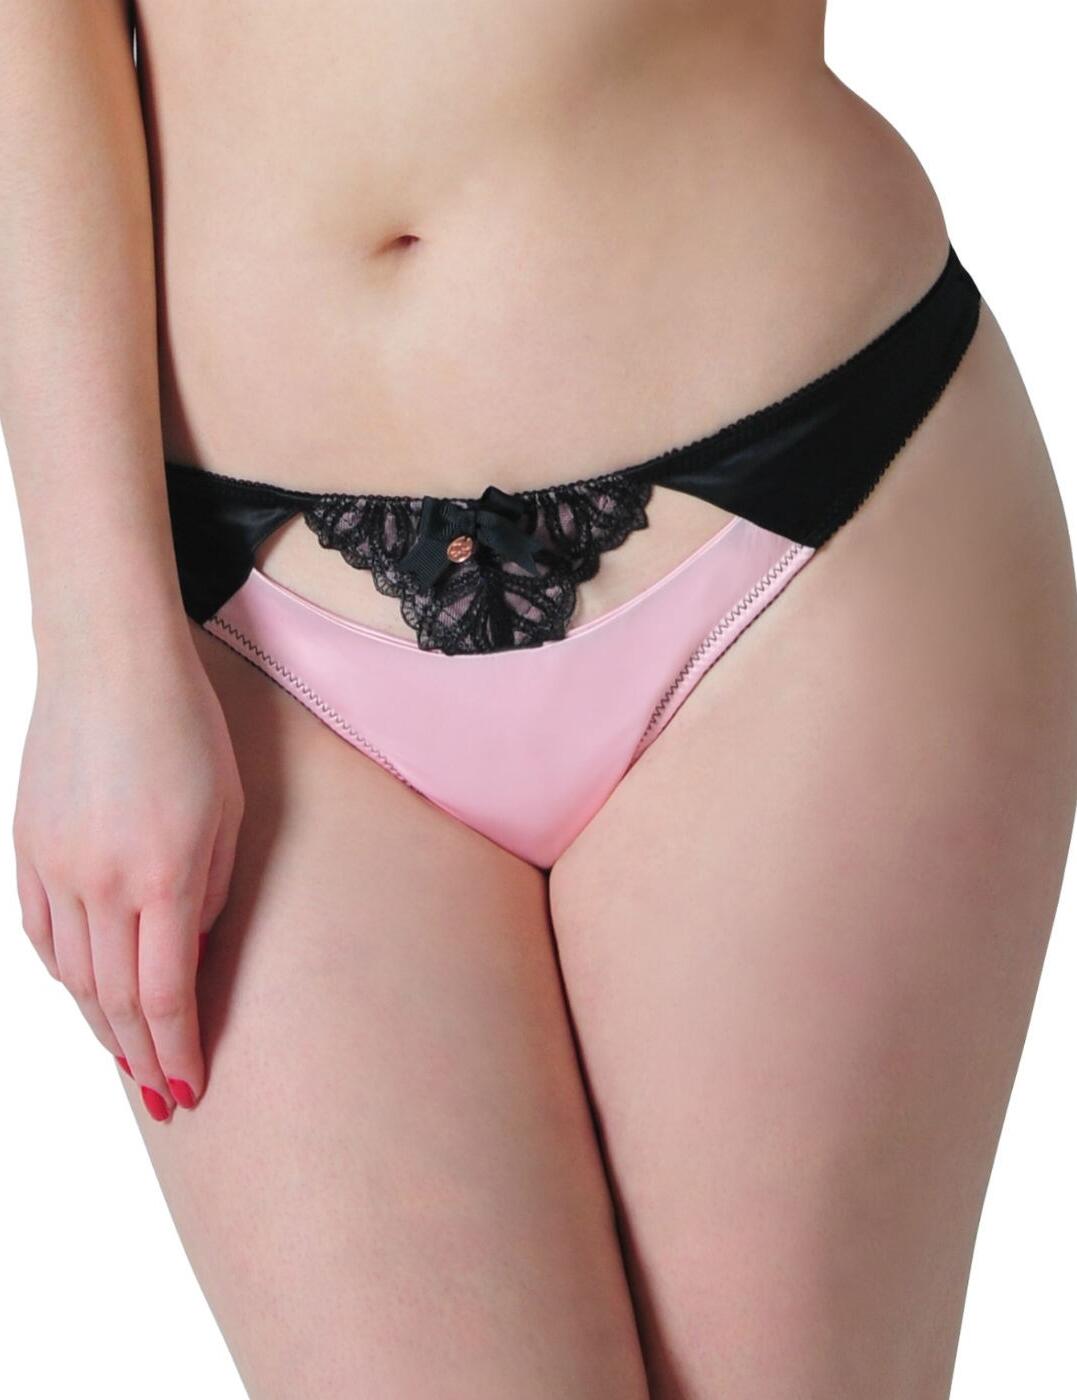 ST2502 Scantilly by Curvy Kate Invitation Thong - ST2502 Black/Crystal